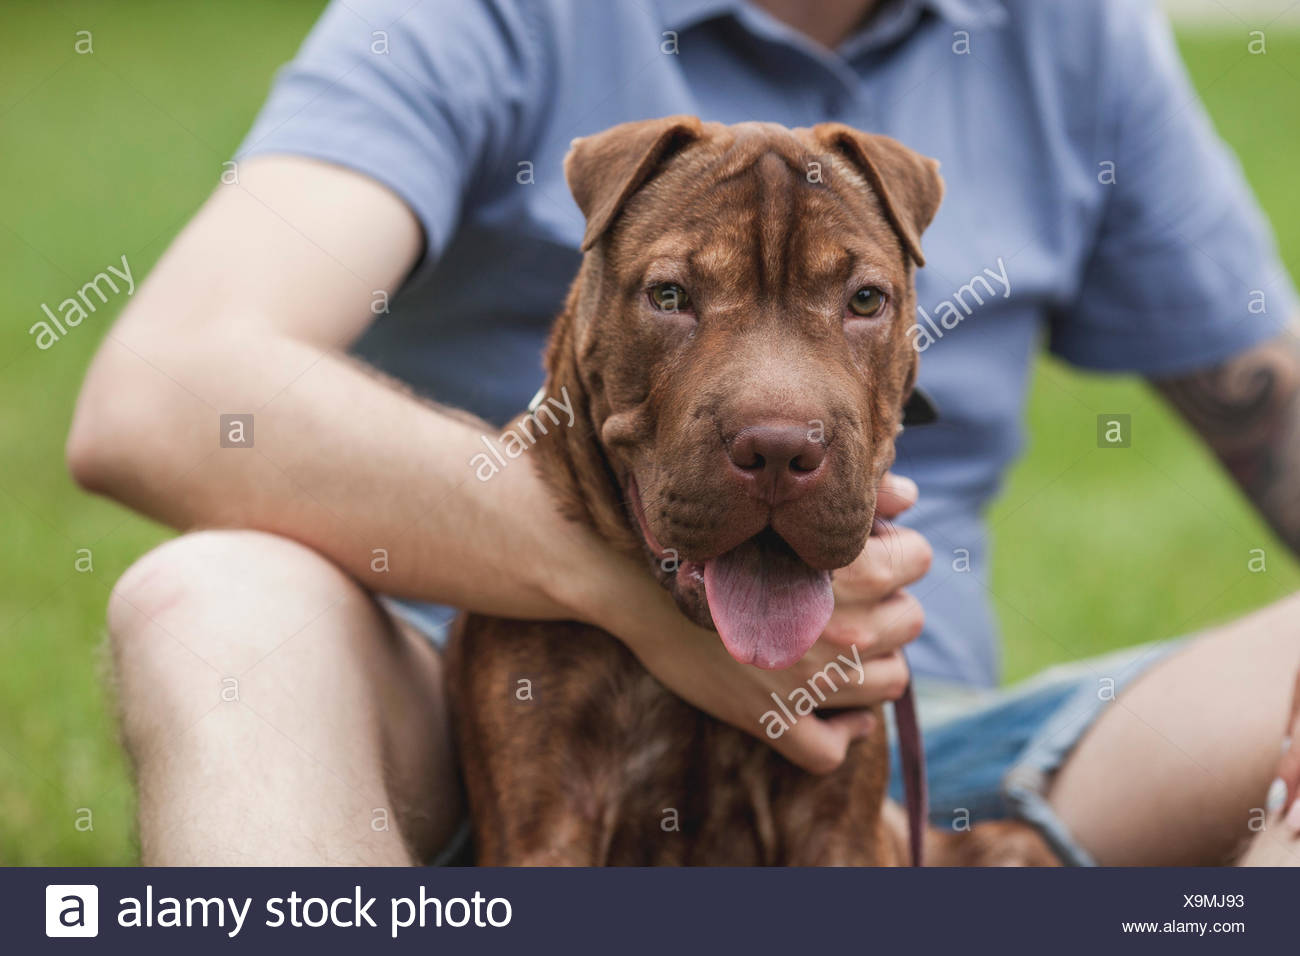 shar pei and terrier mix